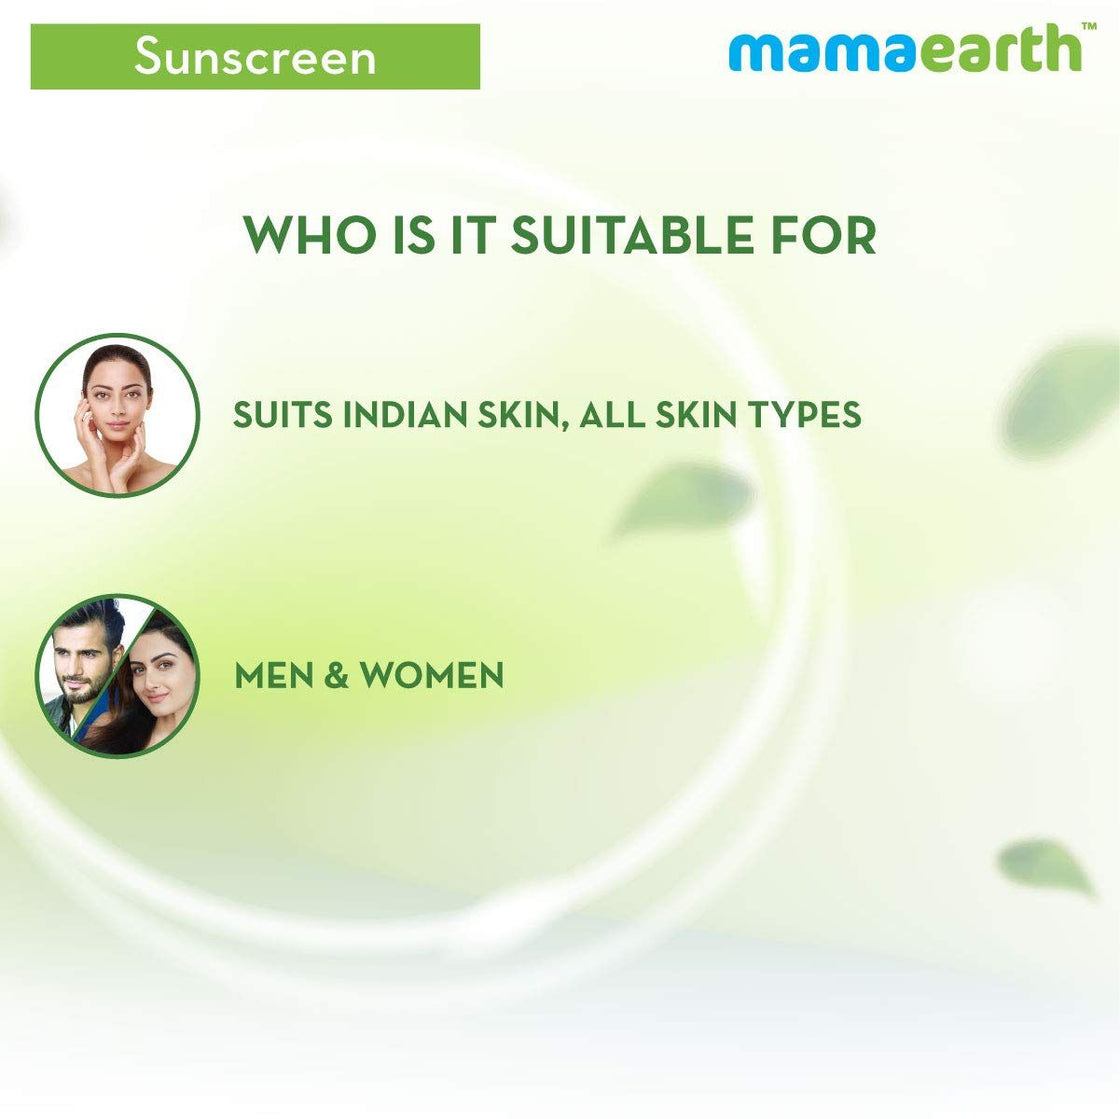 Mamaearth Ultra Light Indian Sunscreen Spf50 Pa+++ With Turmeric & Carrot Seed-5